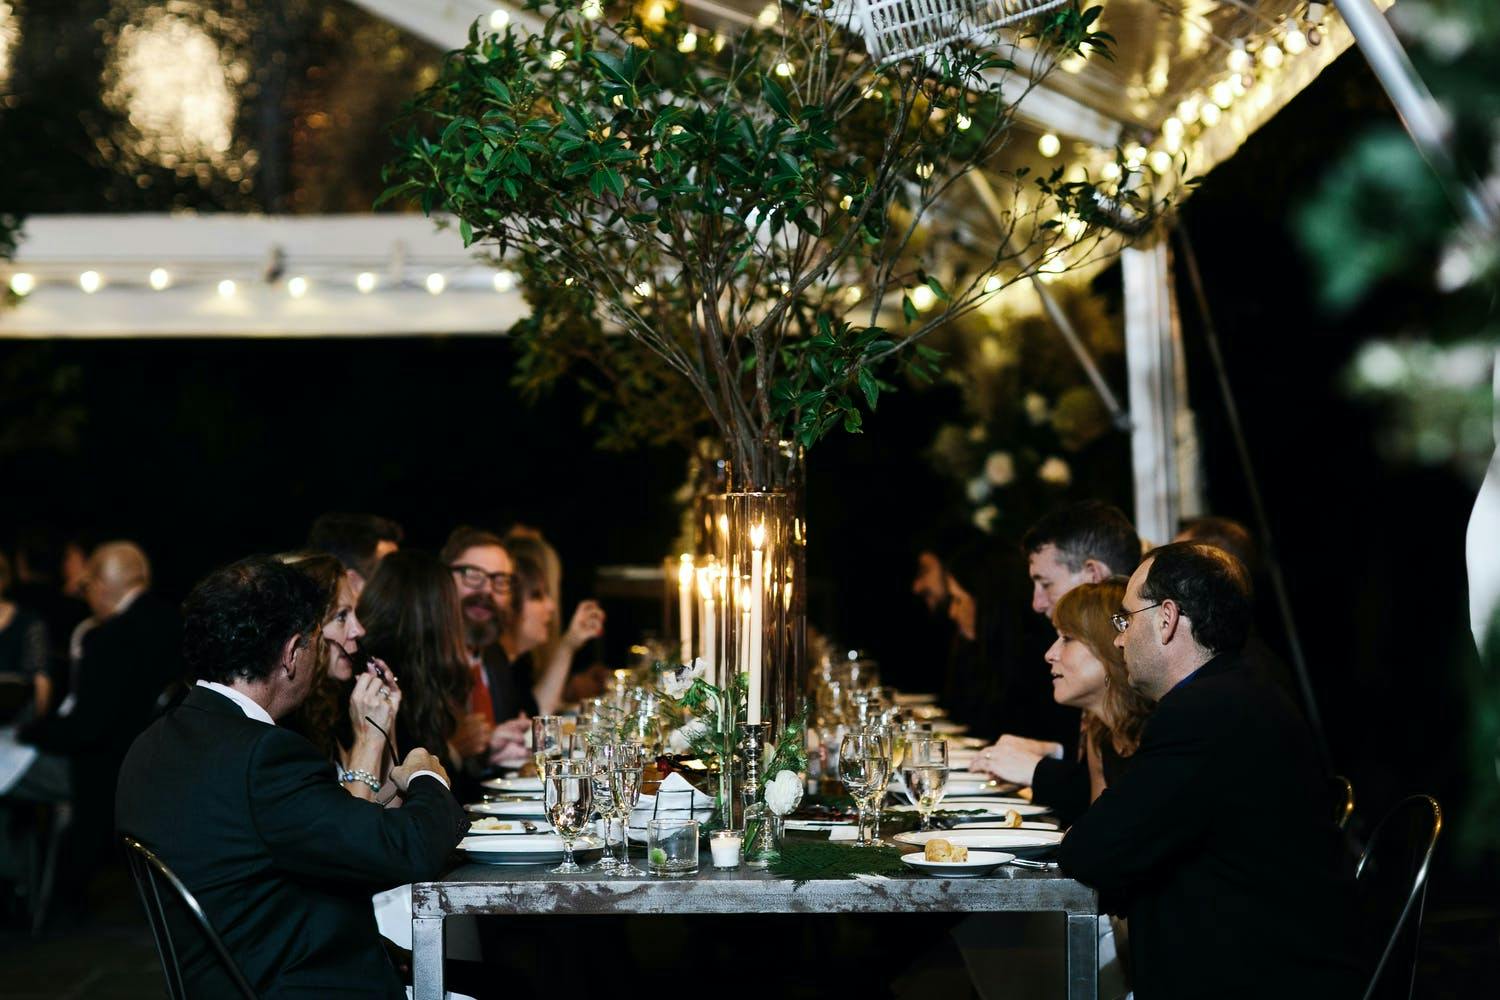 Rustic Tented Wedding With Greenery Centerpieces and Candlelight | PartySlate